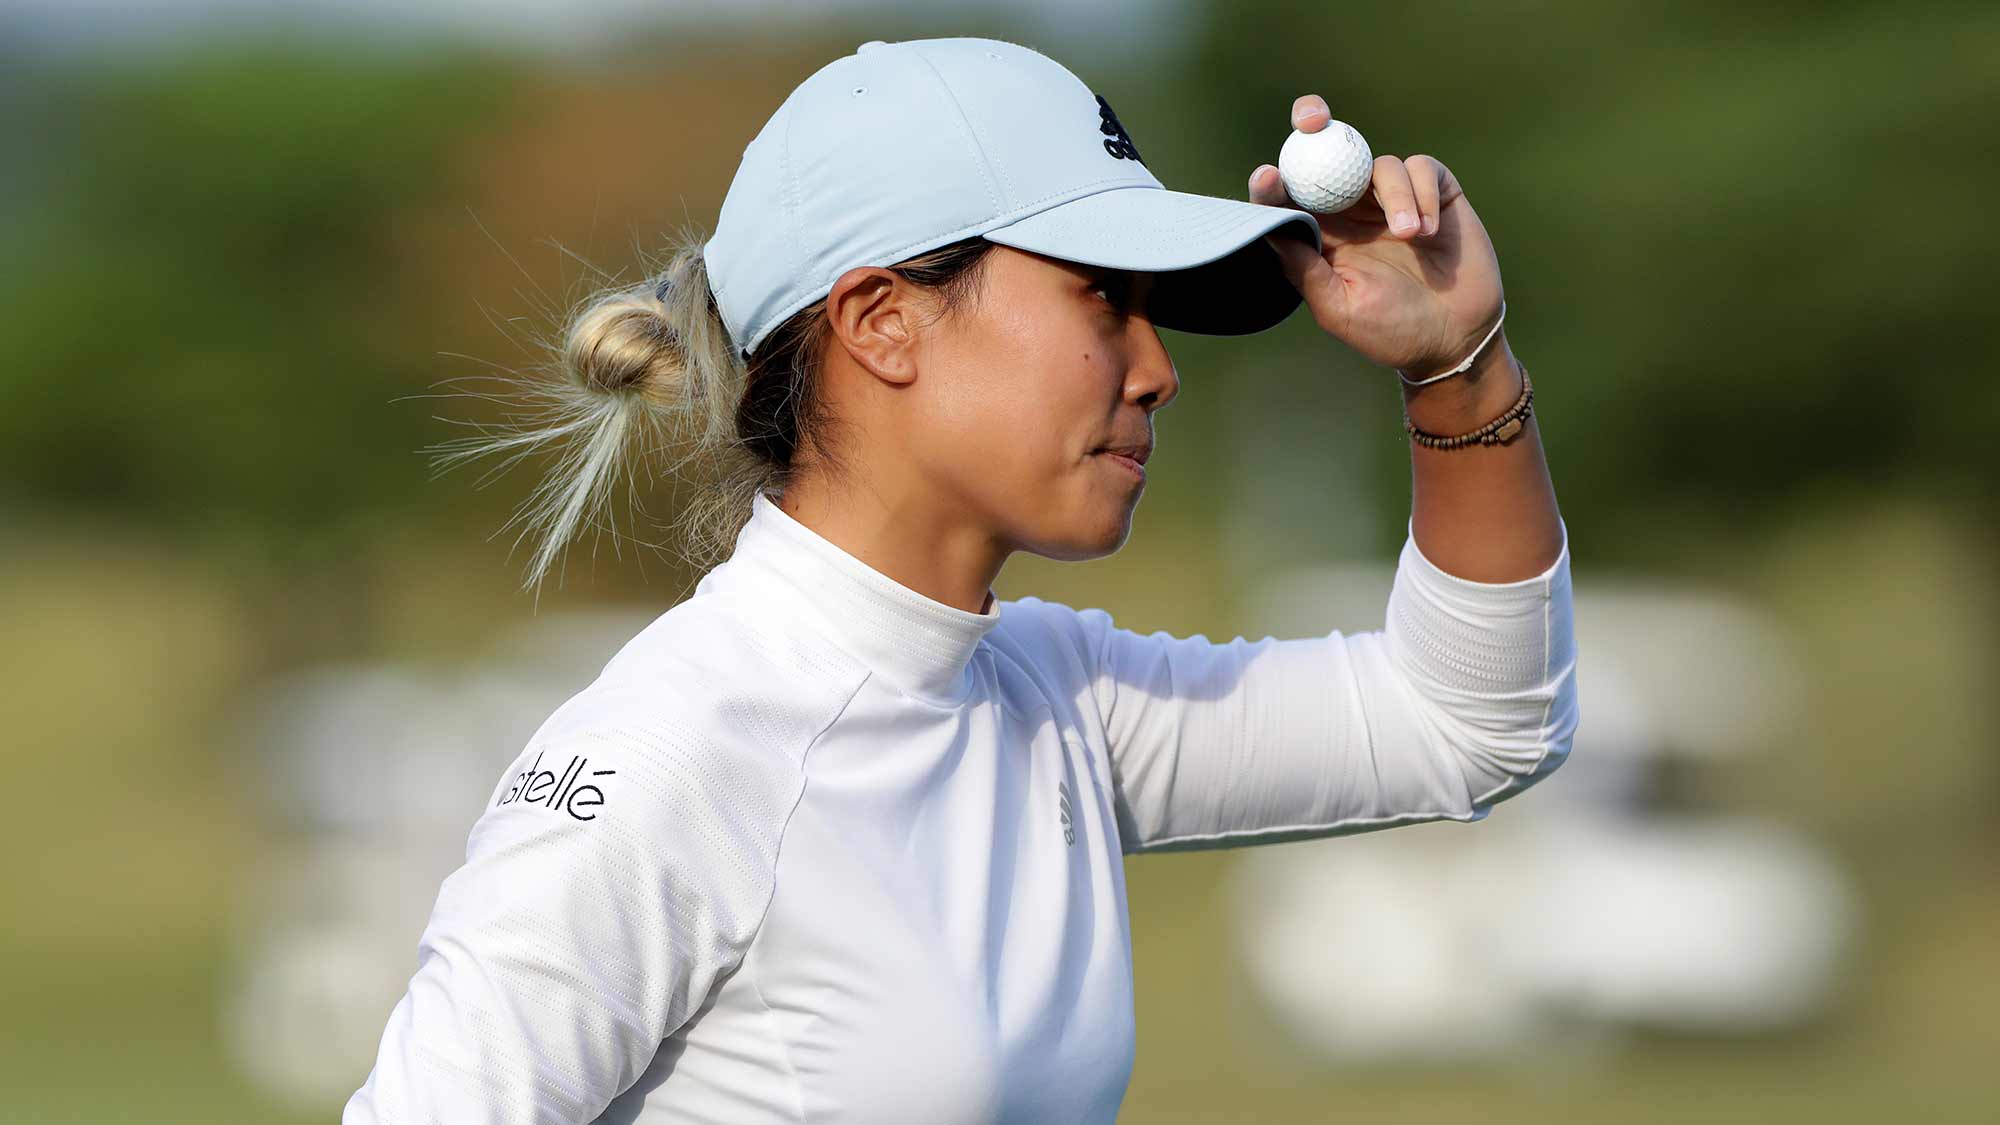 Danielle Kang of USA acknowledges the gallery on the eighteenth hole during Round 3 of 2019 BMW Ladies Championship at LPGA International Busan on October 26, 2019 in Busan, Republic of Korea